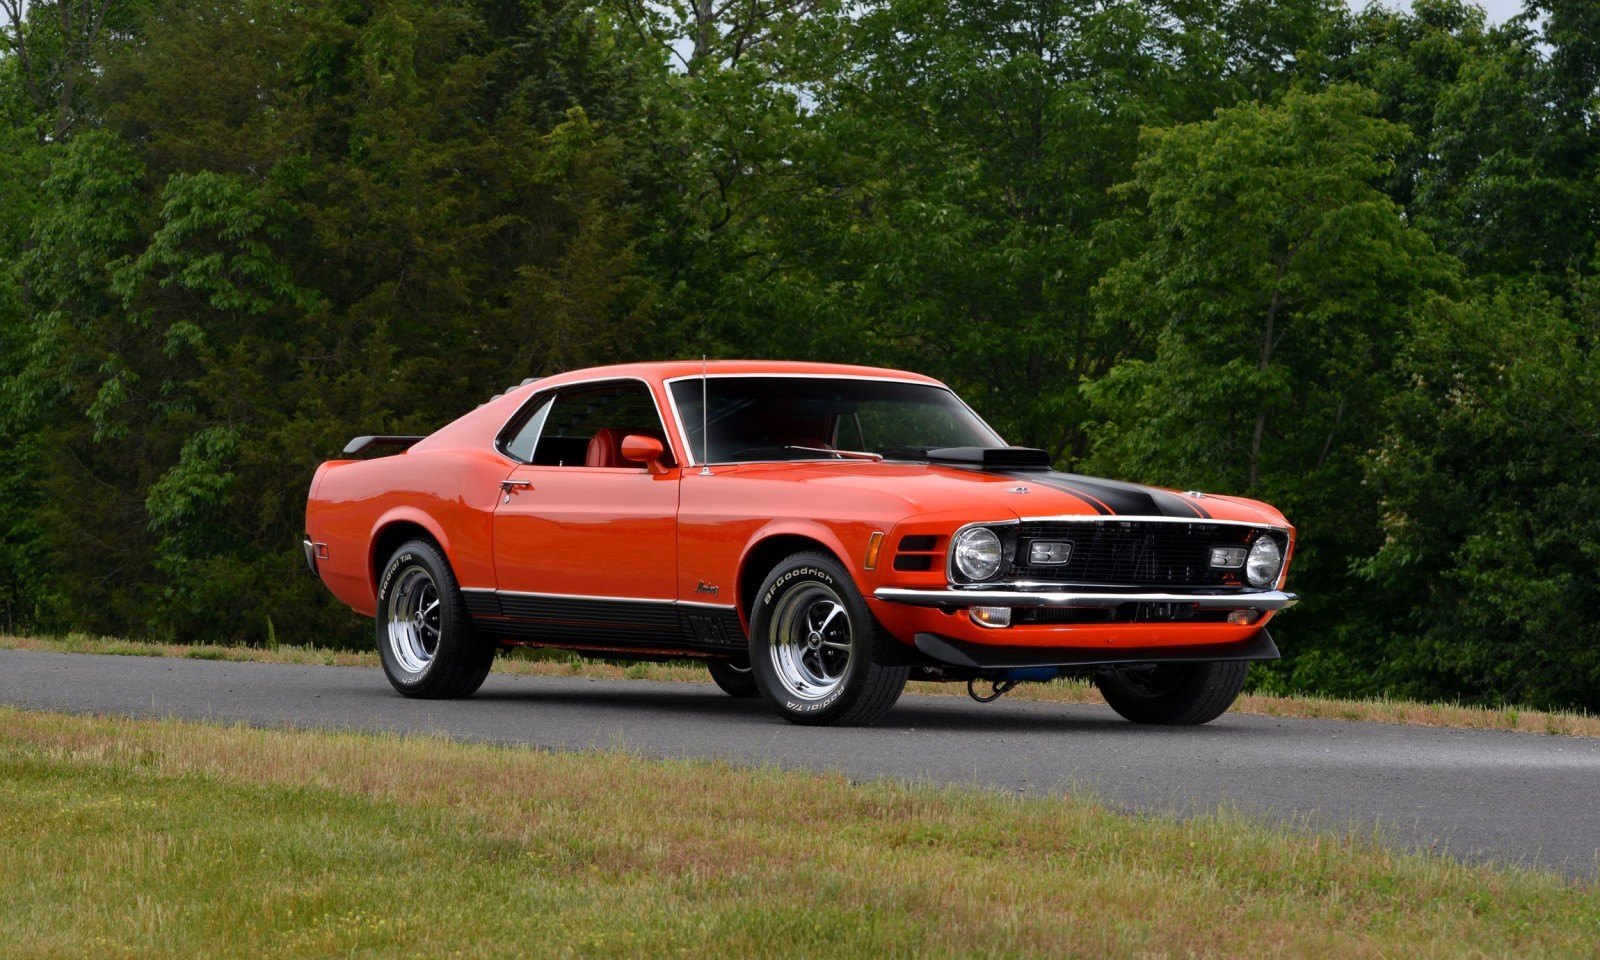 S114_1970 Ford Mustang Mach 1 Fastback Calypso Coral 11